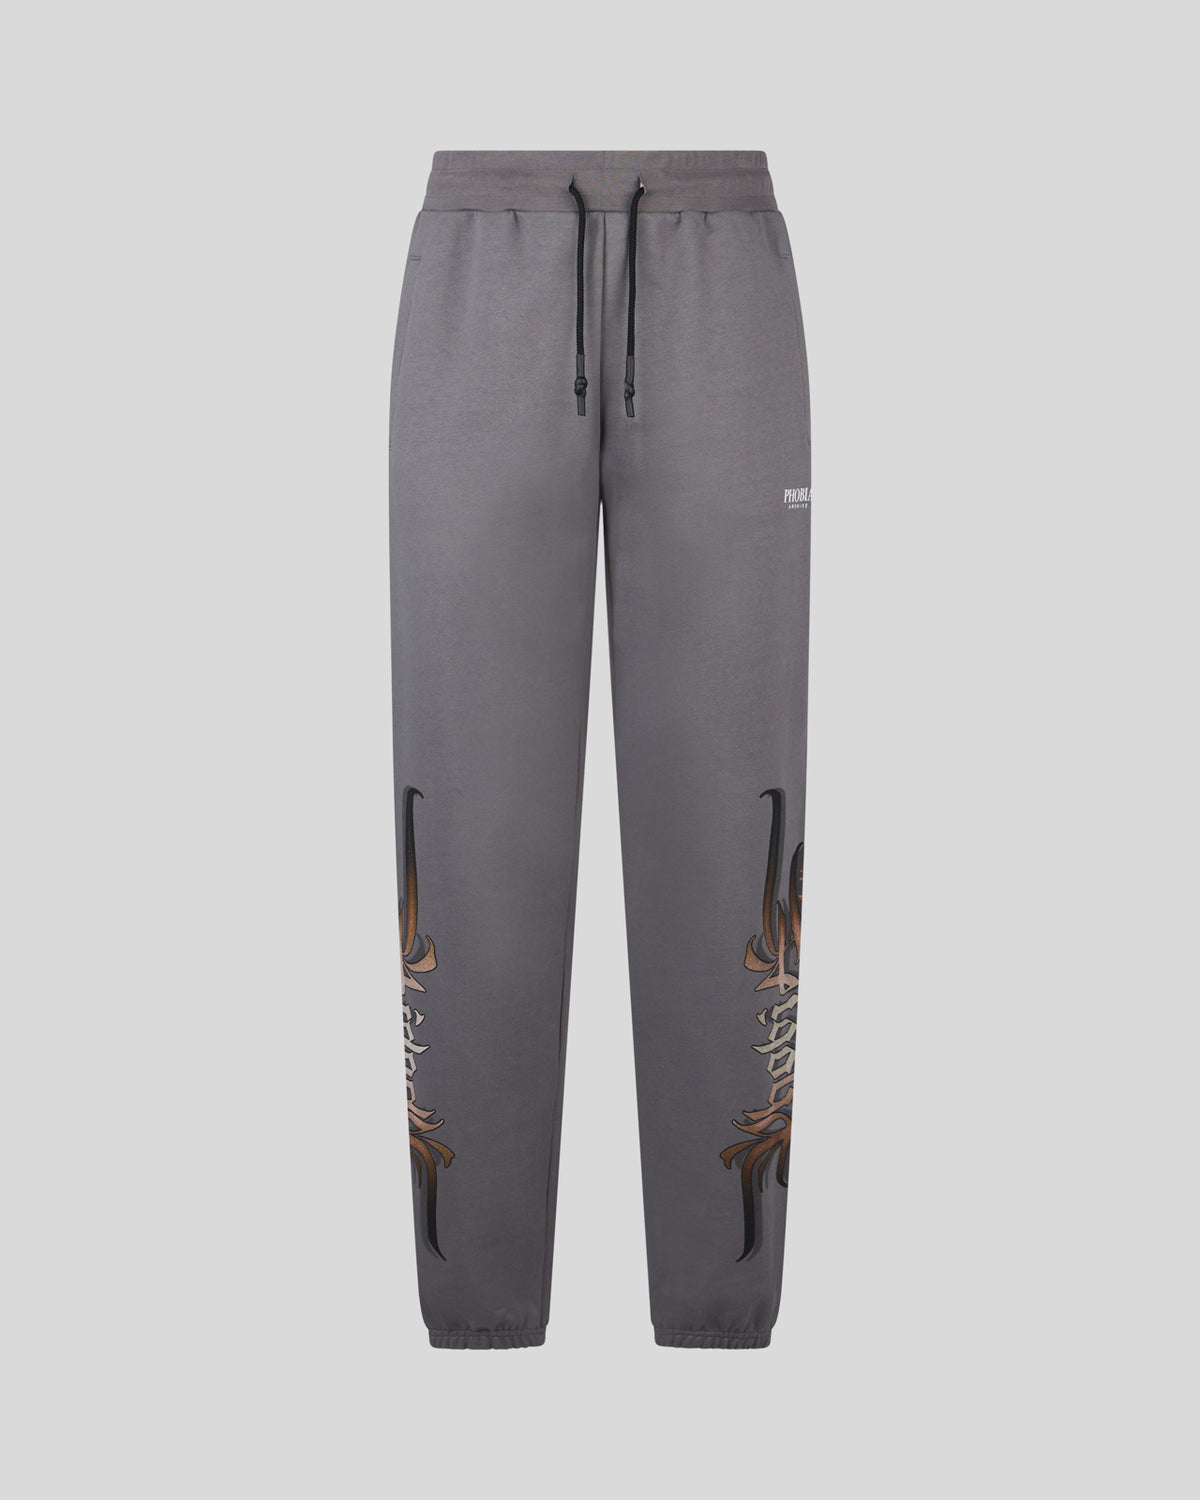 PHOBIA GREY PANT WITH GOTHIC SH PRINT